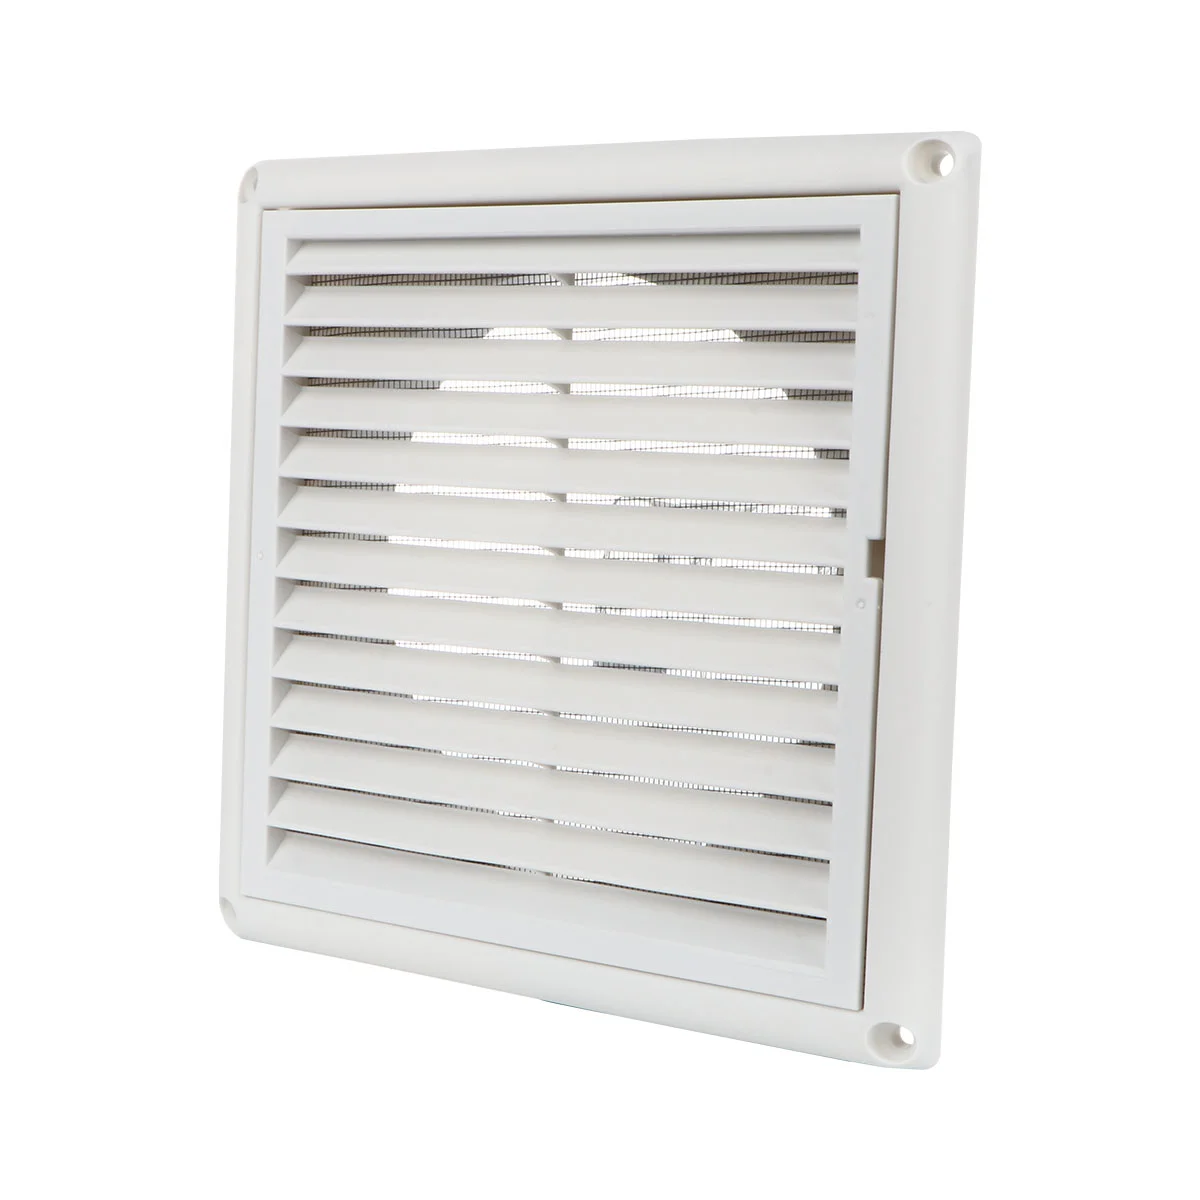 

Air Vent Covers for Walls, Air Cover Ventilation Grill Cover Wall Vents Interior Walls Wall Vent Cover Air Brick Covers